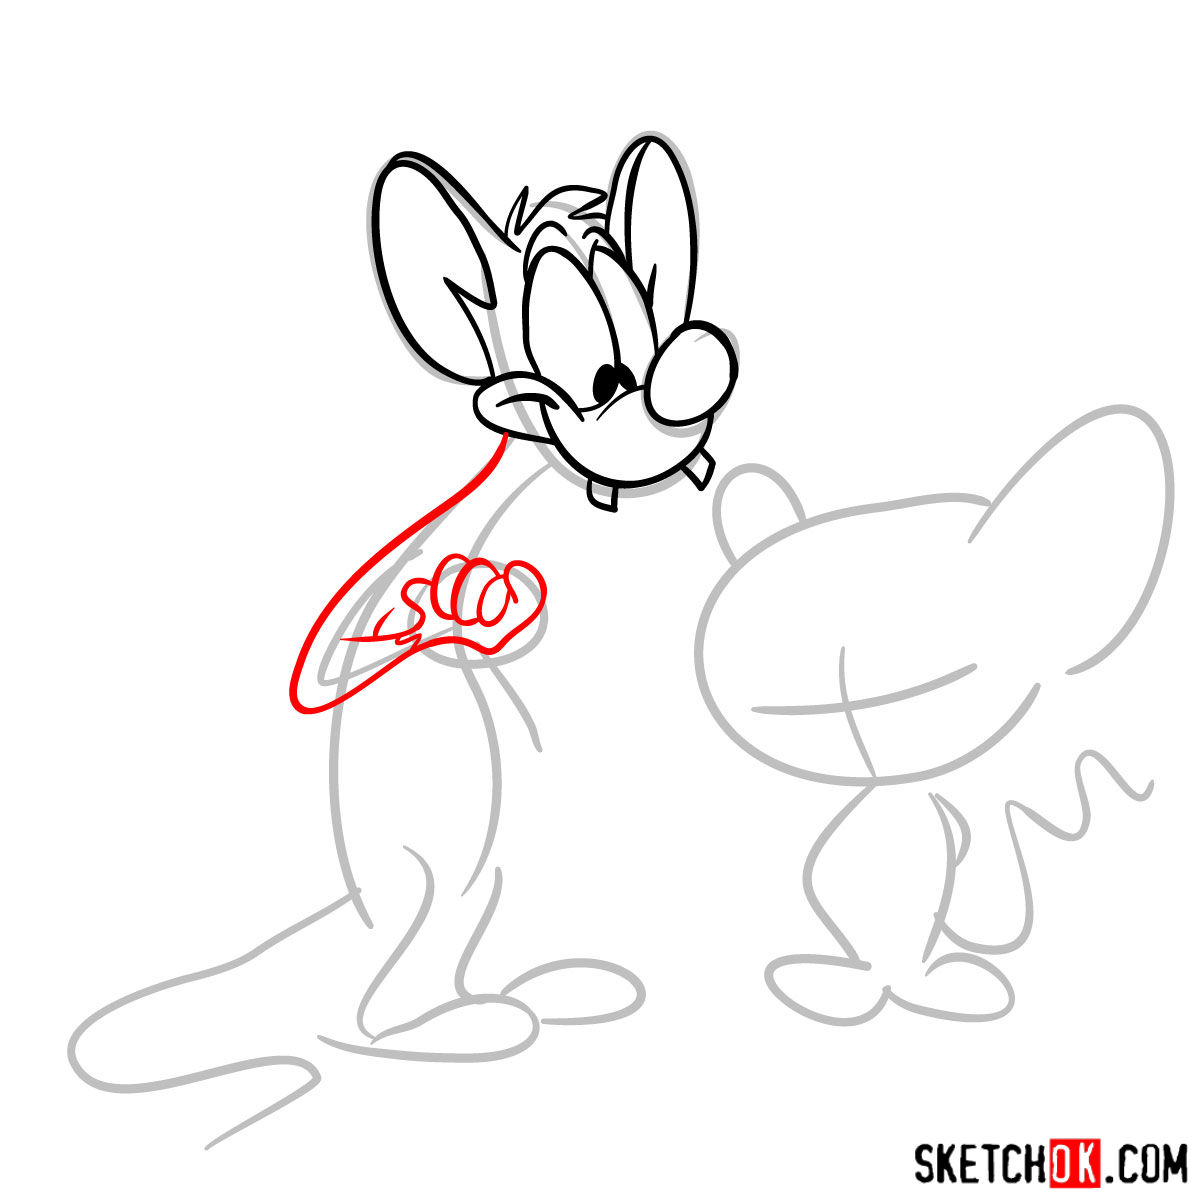 How to draw Pinky and the Brain together - step 05